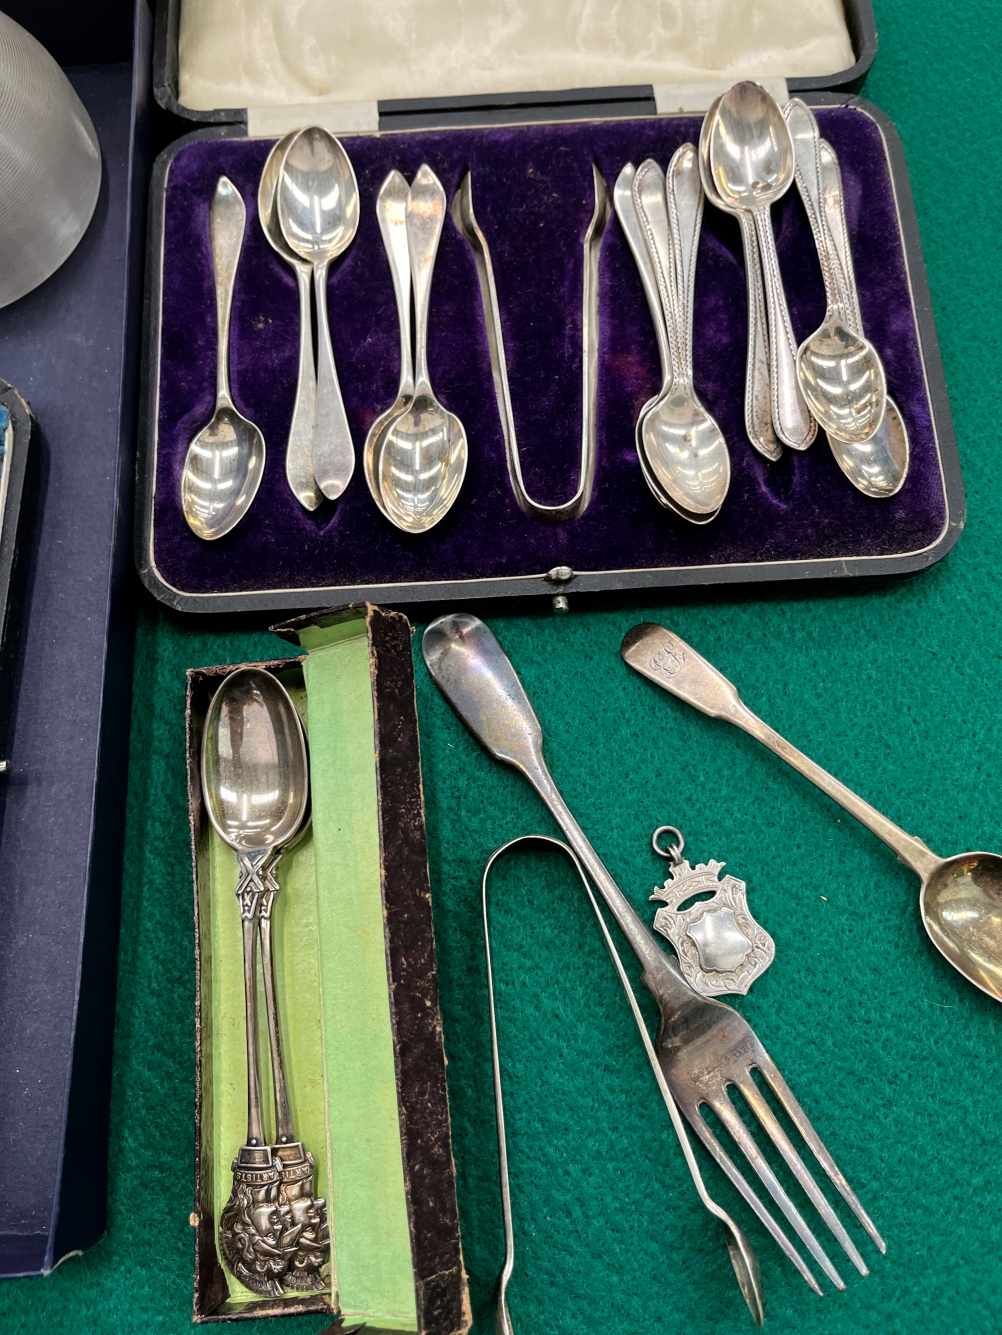 BOXED SILVER WARES INCLUDING NAPKIN RINGS, A SUGAR CASTER, COFFEE SPOONS TOGETHER WITH A GLASS - Image 4 of 5